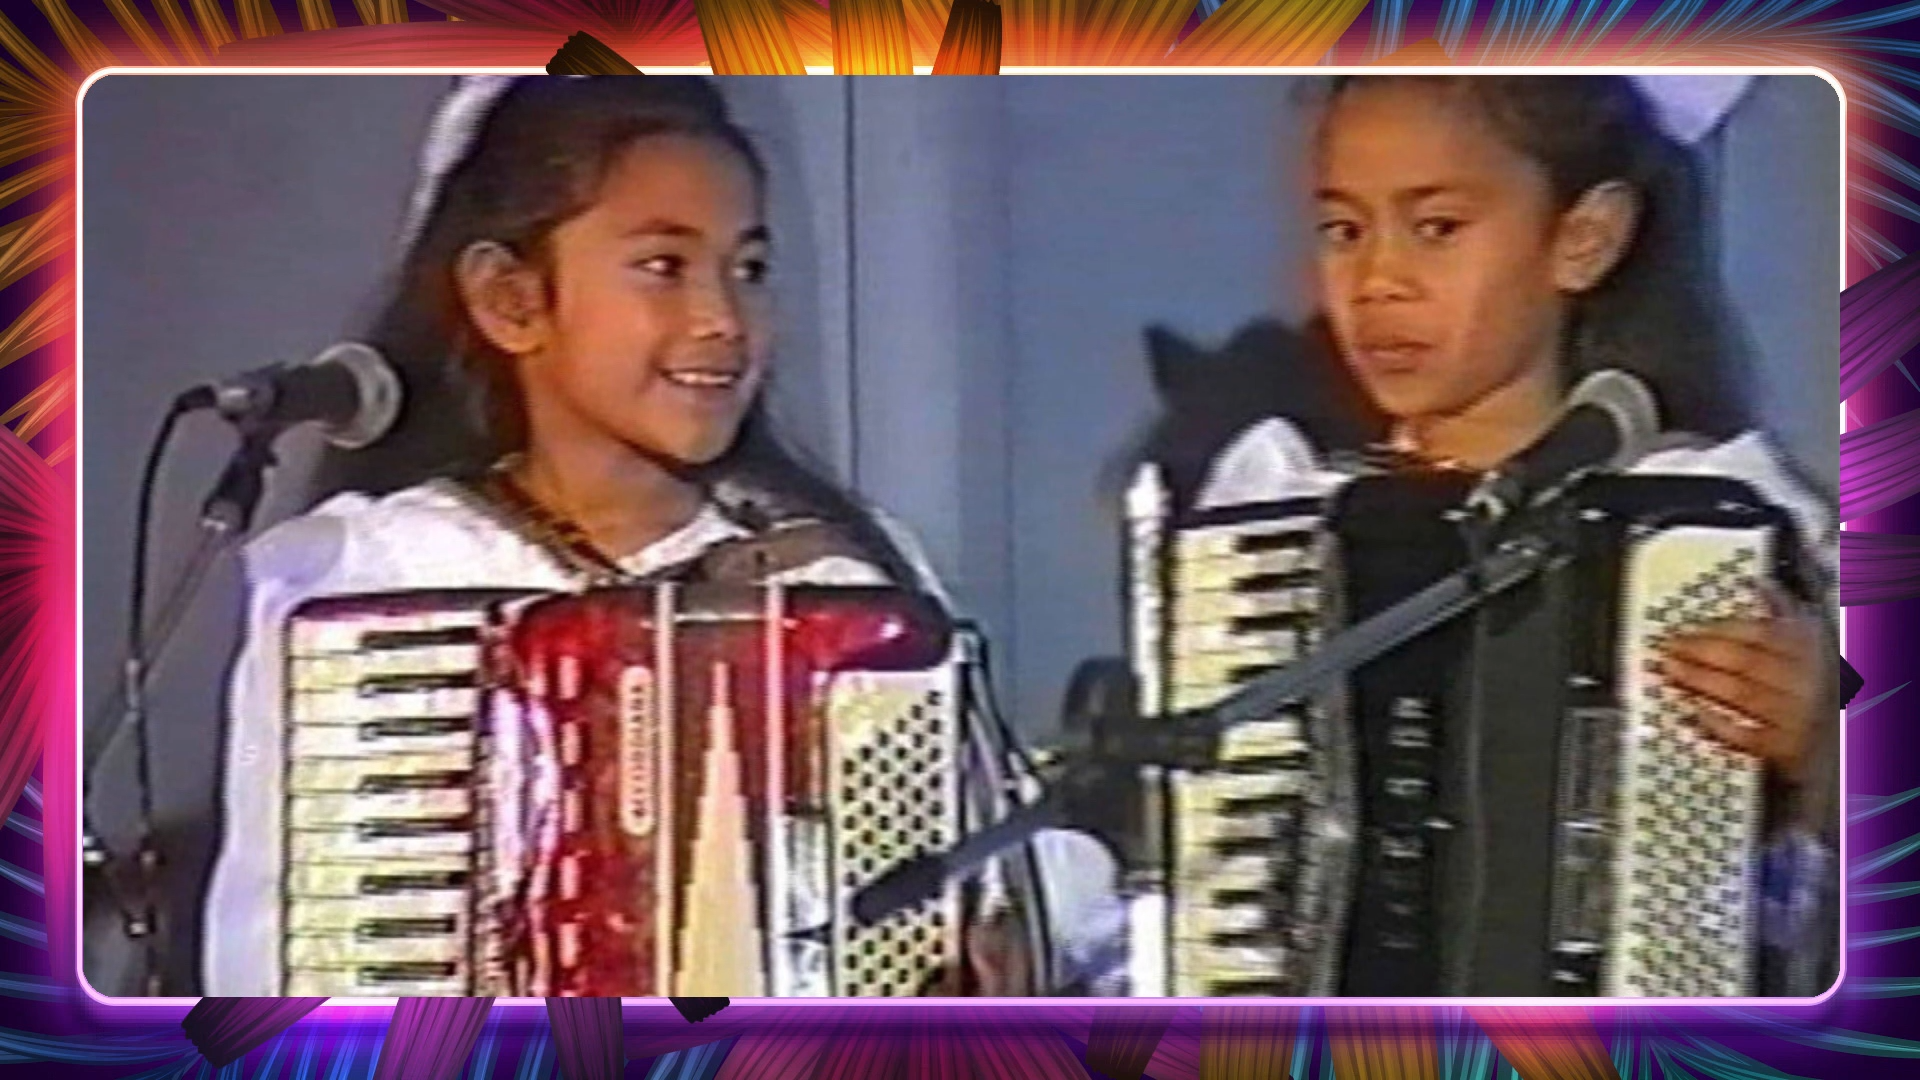 Who knew Breakfast host Indira Stewart could play the accordian?